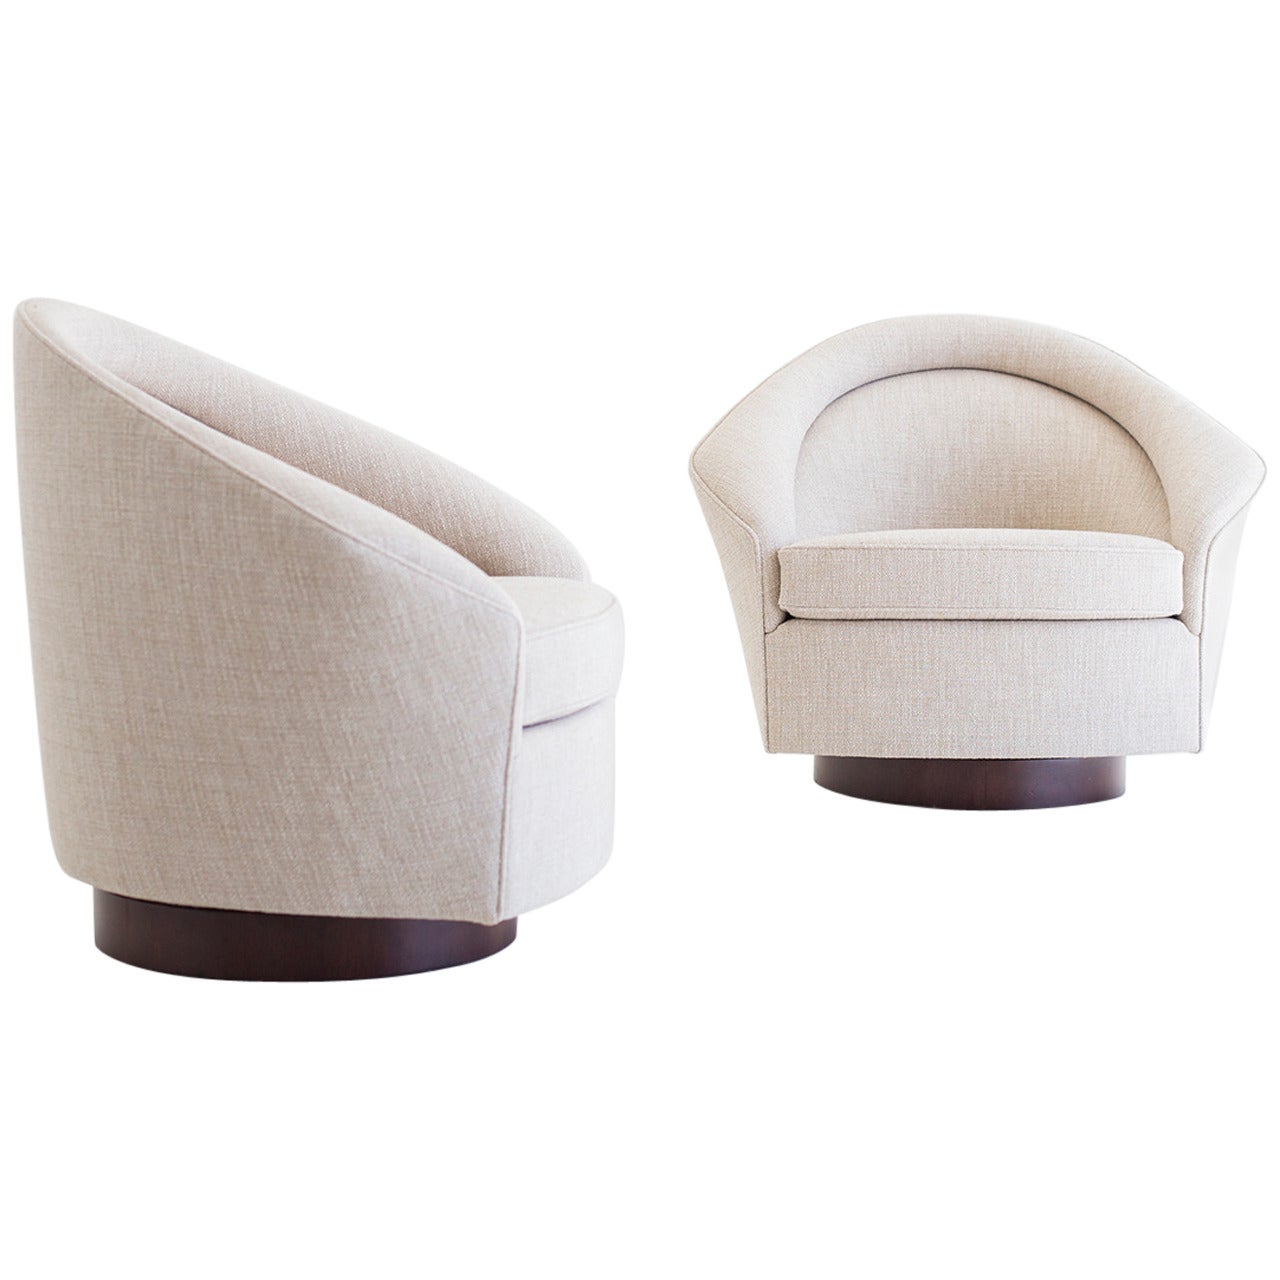 Adrian Pearsall Low Lounge Chairs for Craft Associates